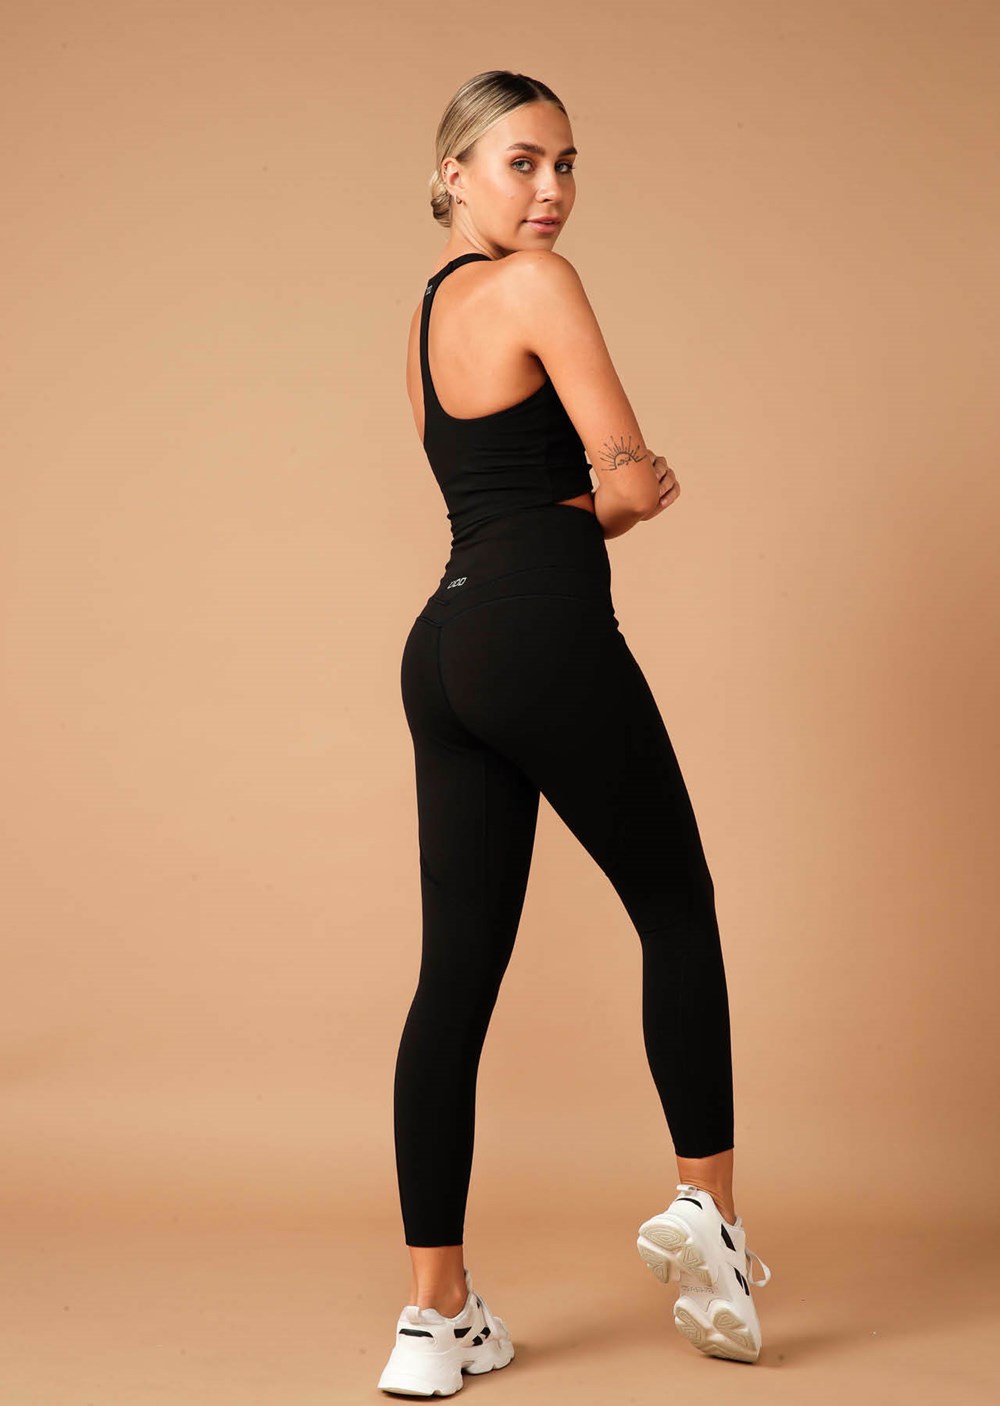 Womens Lorna Jane Leggings Cheapest Price - Smooth Booty Support Ankle Biter  Black